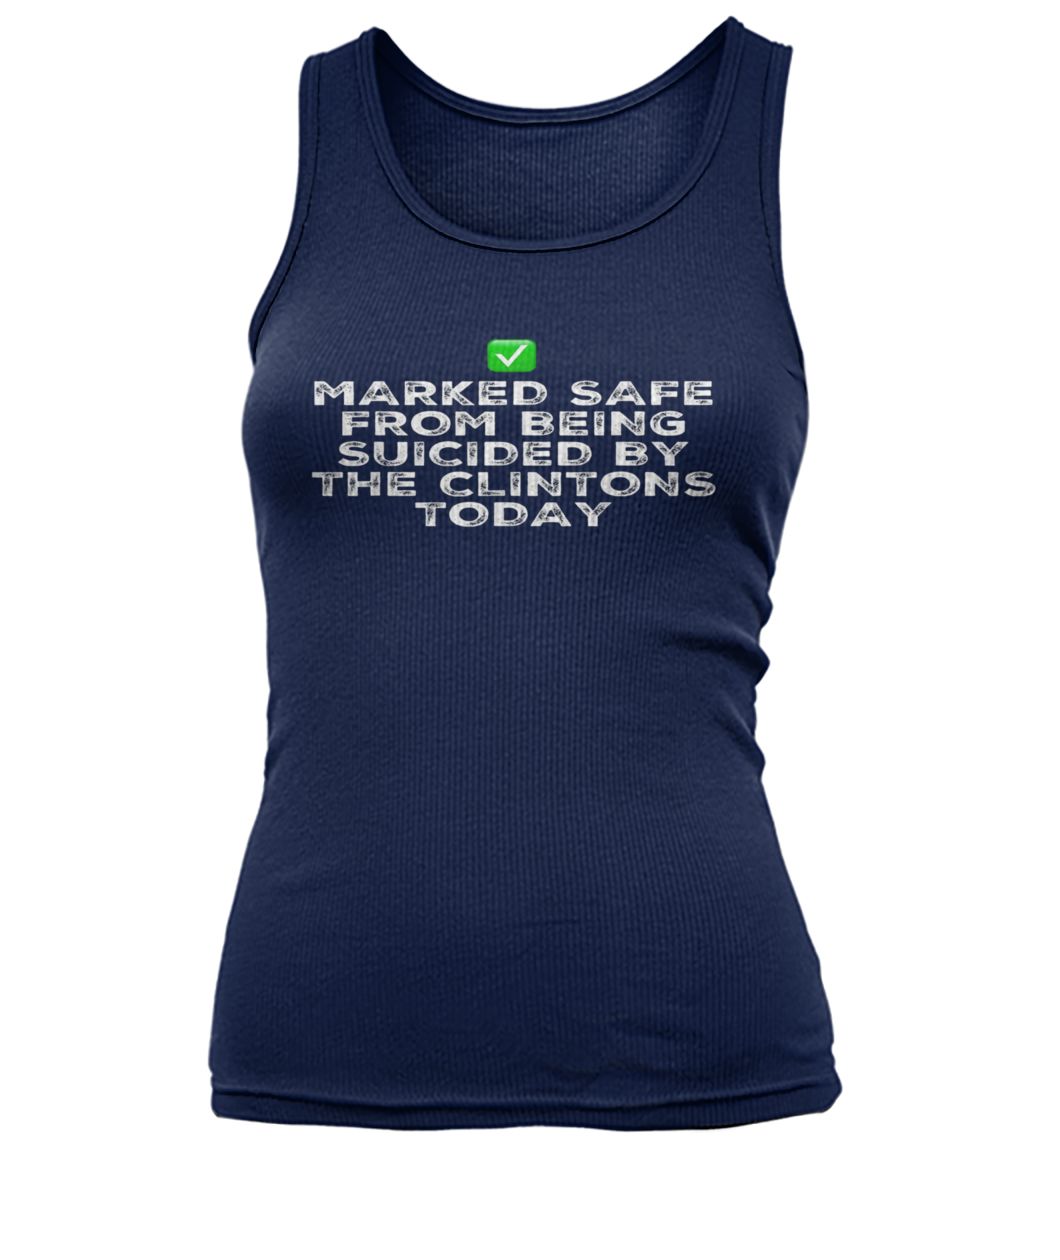 Marked safe from being suicided by the clintons today women's tank top